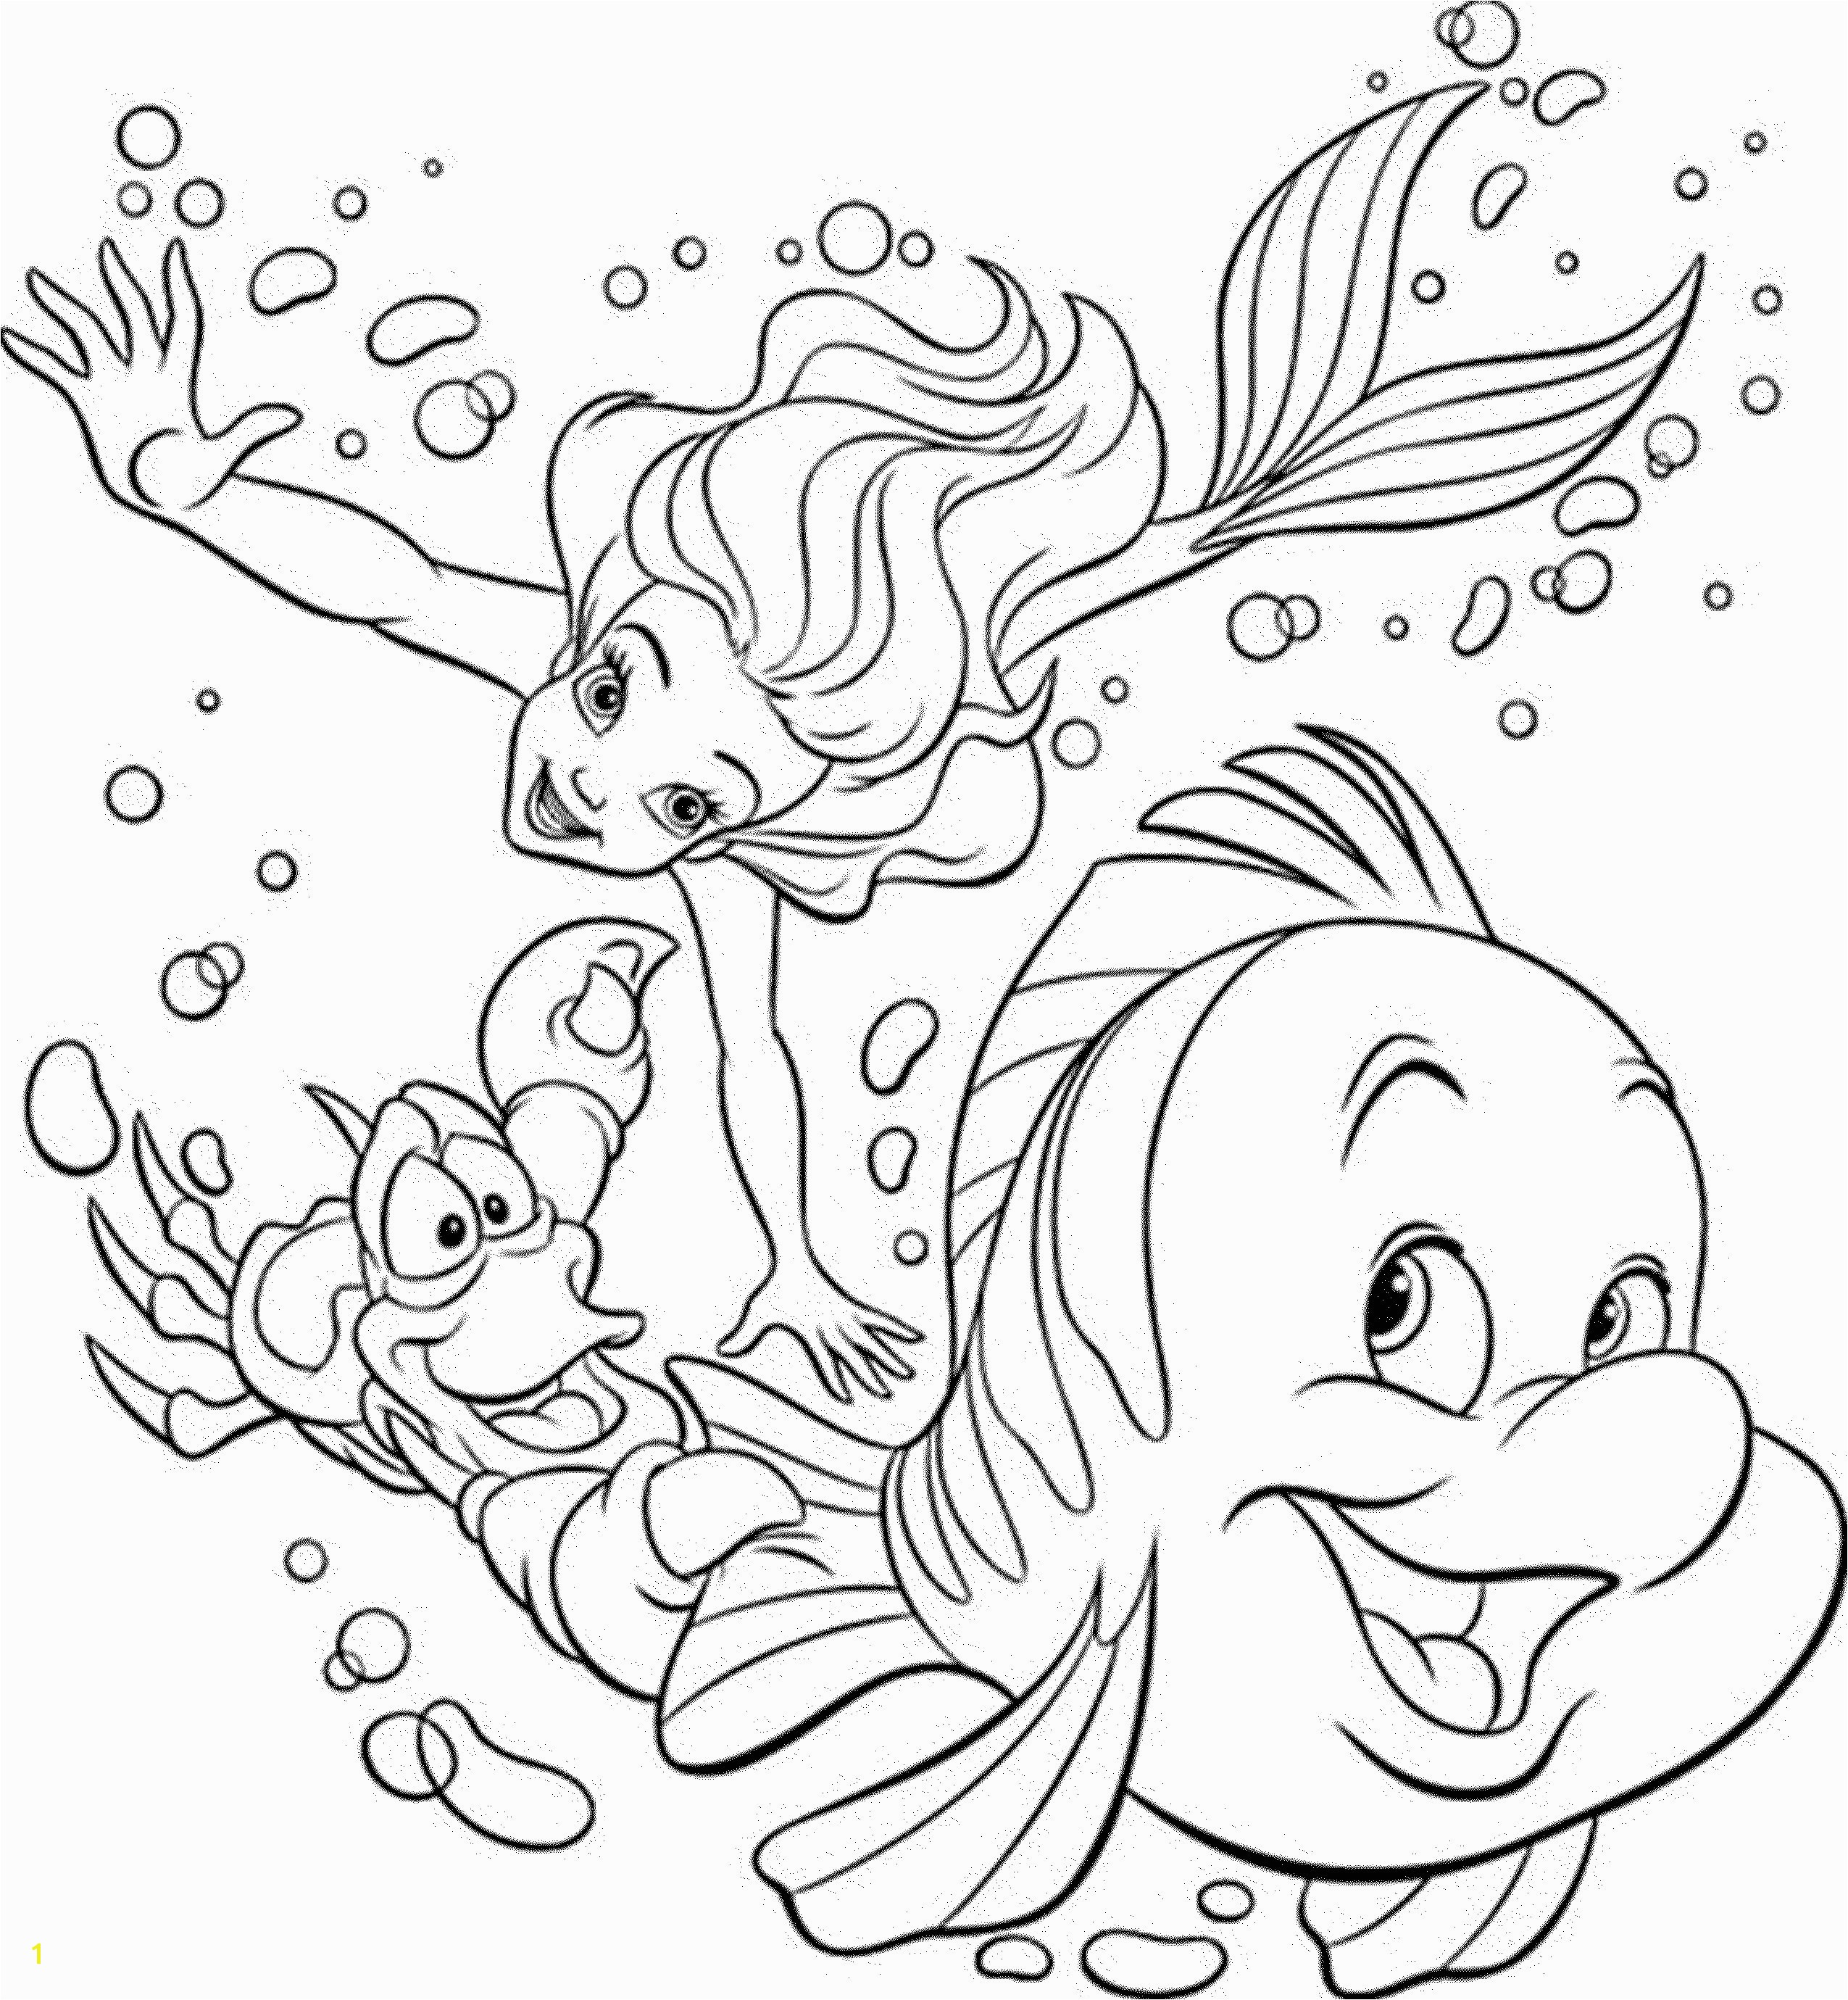 Pistol Pete Coloring Page Pistol Pete Coloring Page Lovely Motorcycle Helmet Coloring Pages